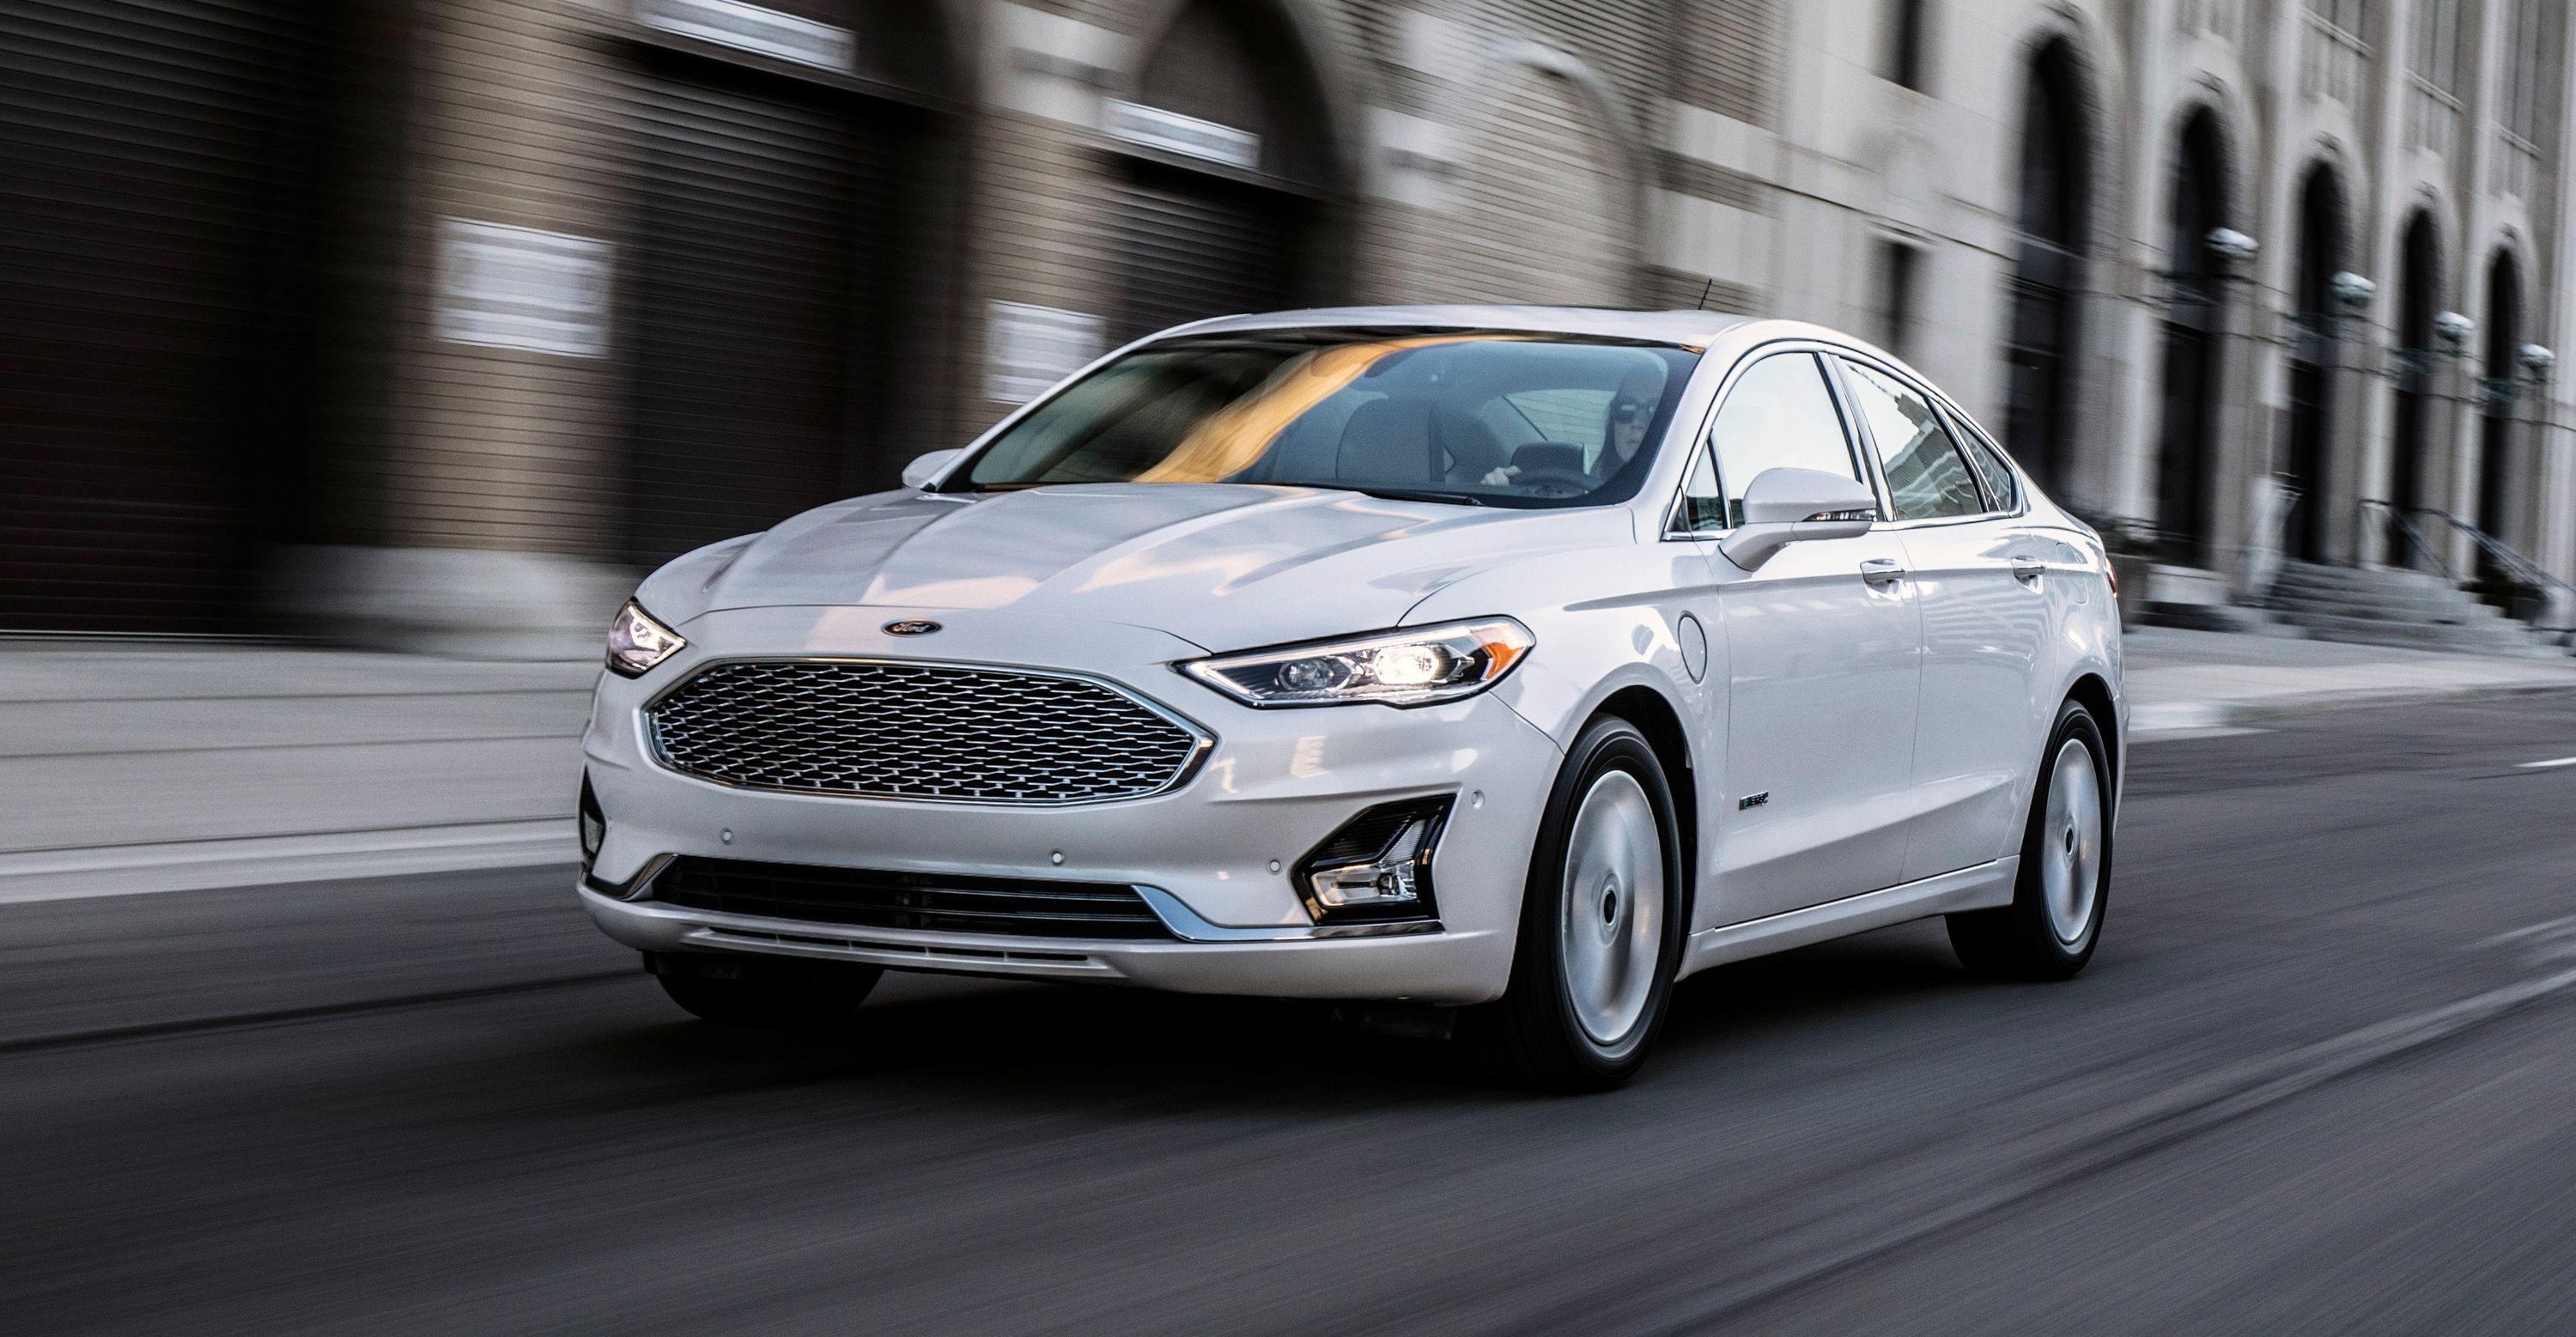 2018 Ford Wants to Take on Subaru With a Sport Wagon Named Fusion